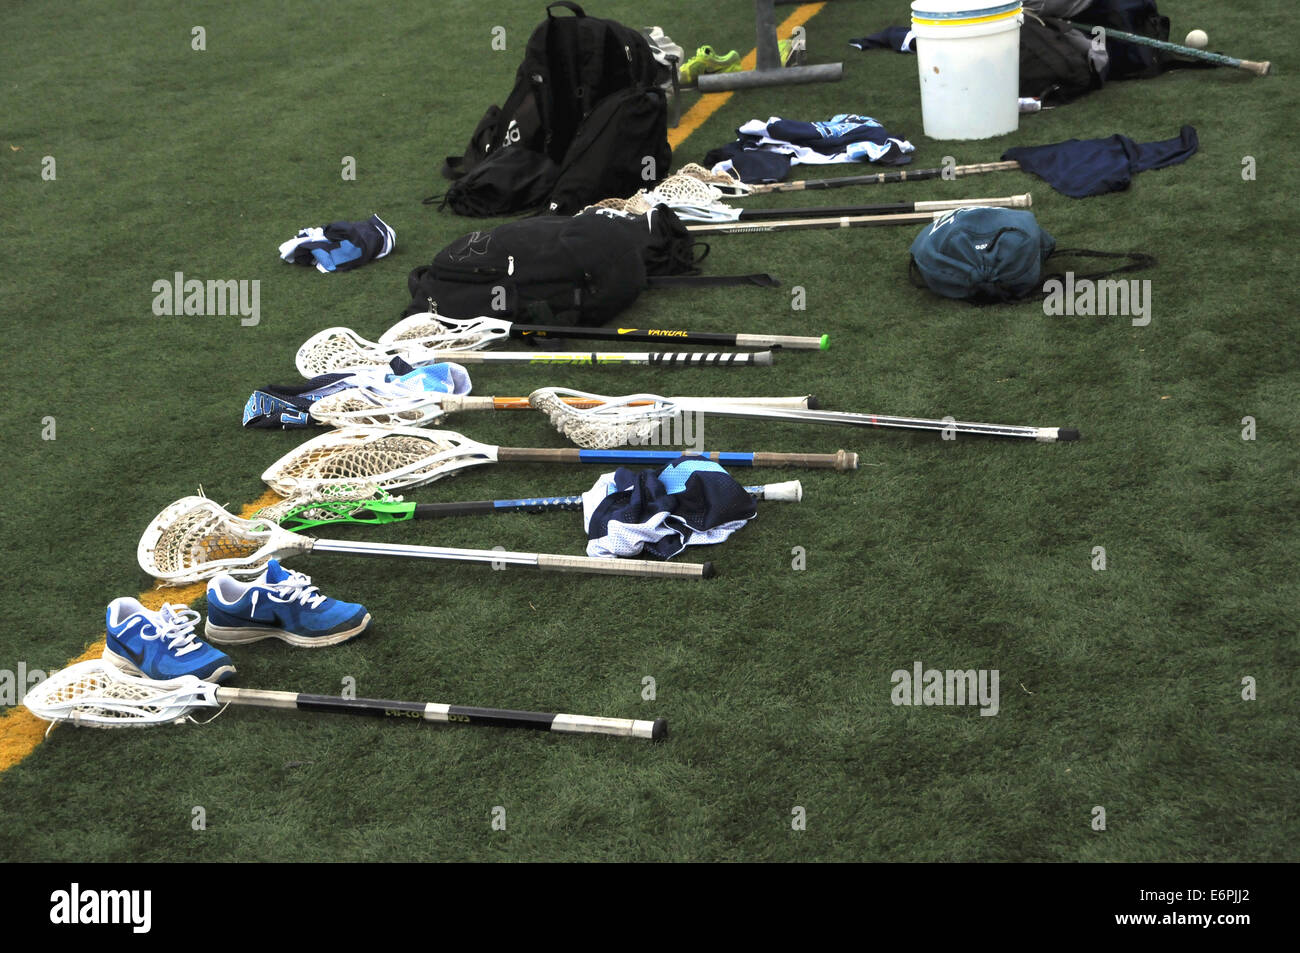 Lacrosse raquets, shoes and backpacks Stock Photo